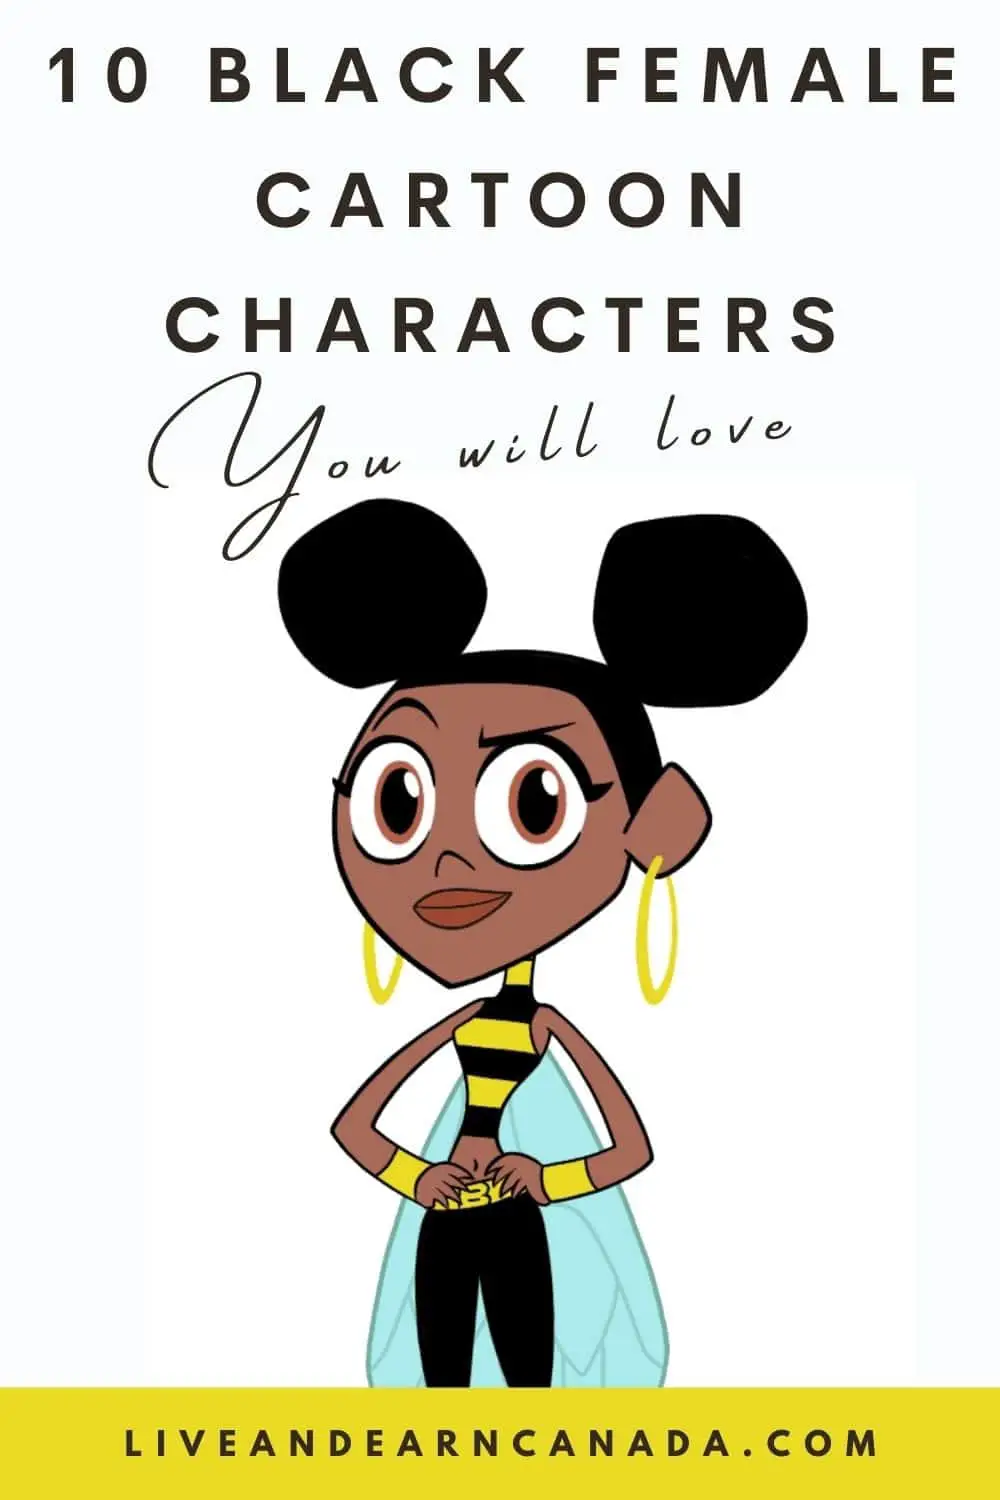 Top 10 Black Female Cartoon Characters! There are several Black female cartoon characters I used to watch as a kid. Now that I have a daughter, I want to introduce her to Black Girl Cartoon Characters! If you had to pick your top 10 favorite Black female cartoon characters who would they be?